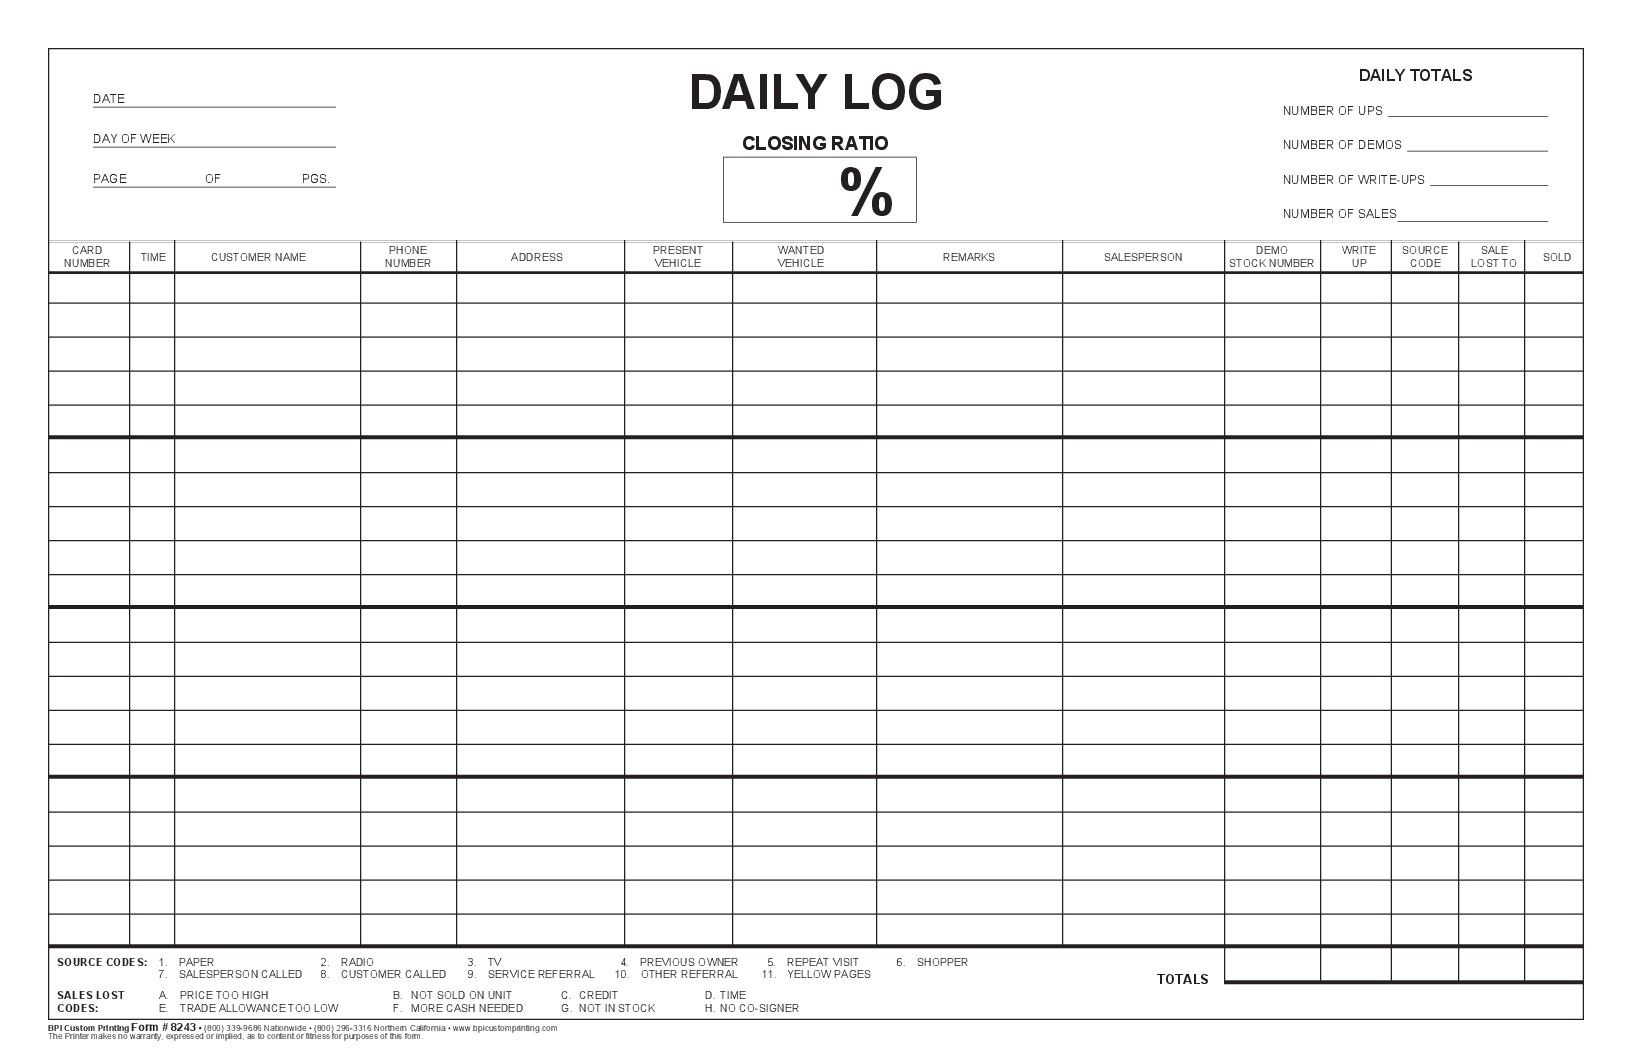 How to fill out a Daily Log Sheet 